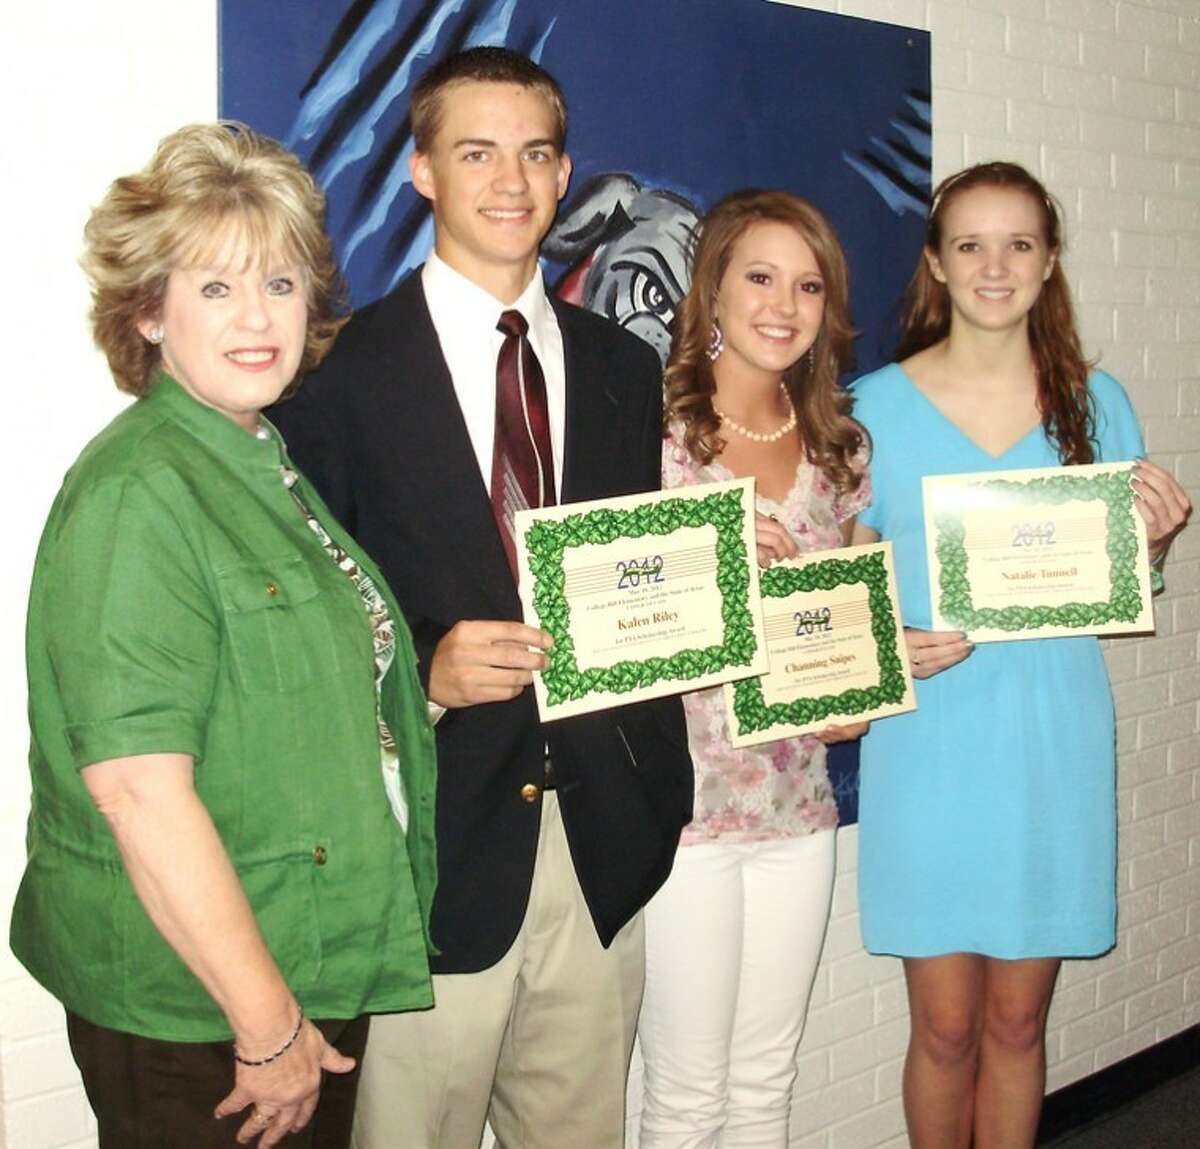 Courtesy PhotoThree Plainview High School graduating seniors were awarded College Hill PTA scholarships at the end-of-the-year PTA program Thursday night. Principal Linda Watson (left) presented scholarships to Kalen Riley, Channing Snipes and Natalie Tunnell, all former College Hill students.